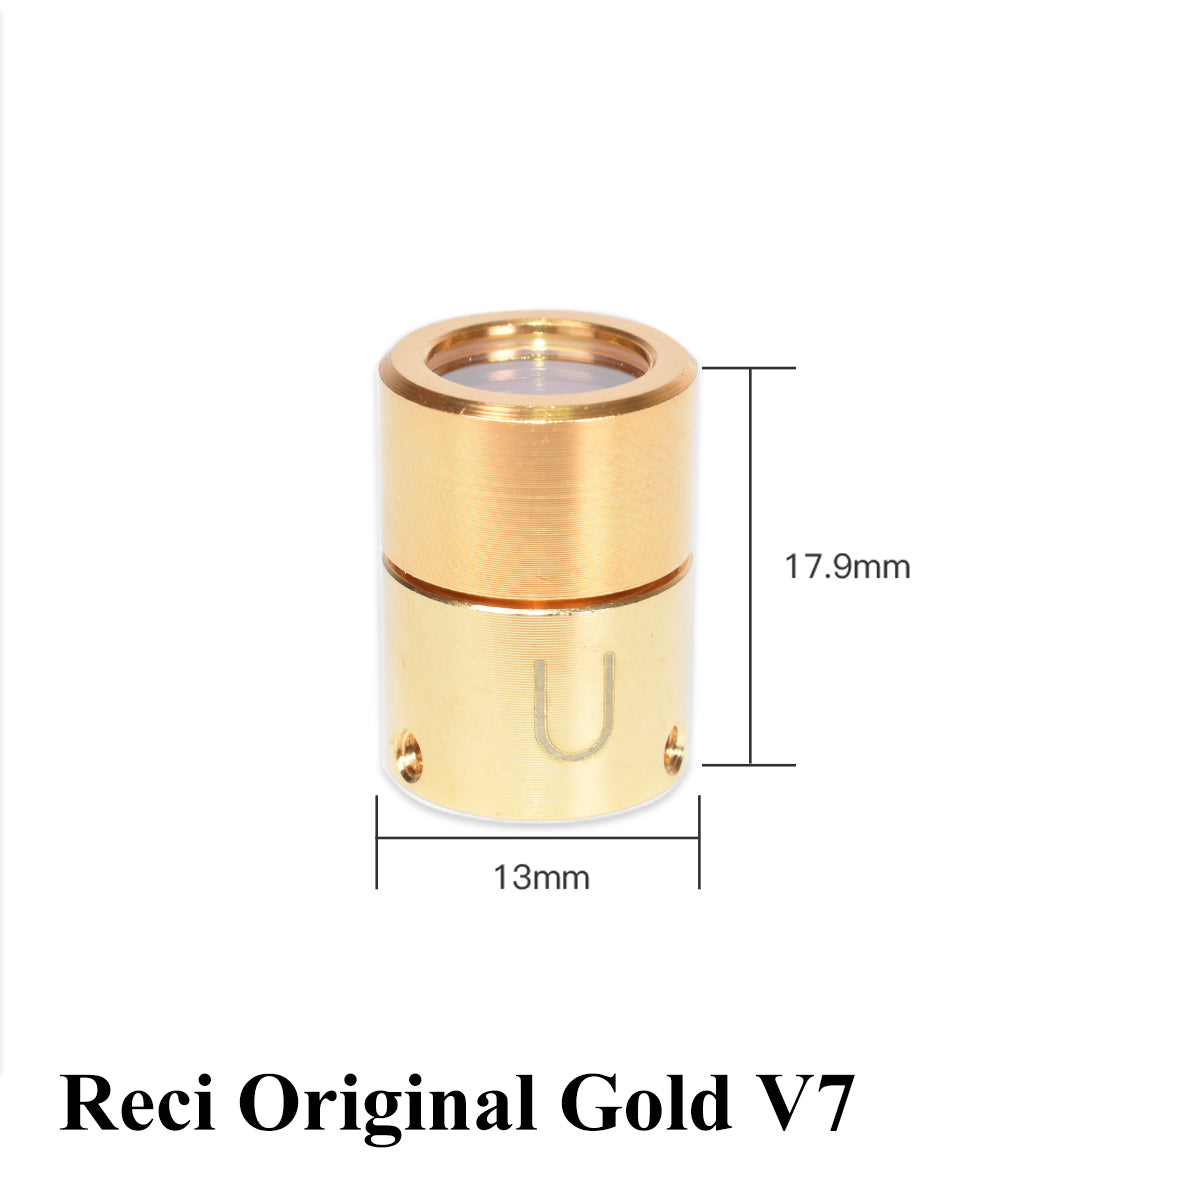 Startnow Original IPG Reci Fiber Laser Source QBH Output Connector Gap 4KW Optic Crystal Protective Lens for 1064nm Cutting Head